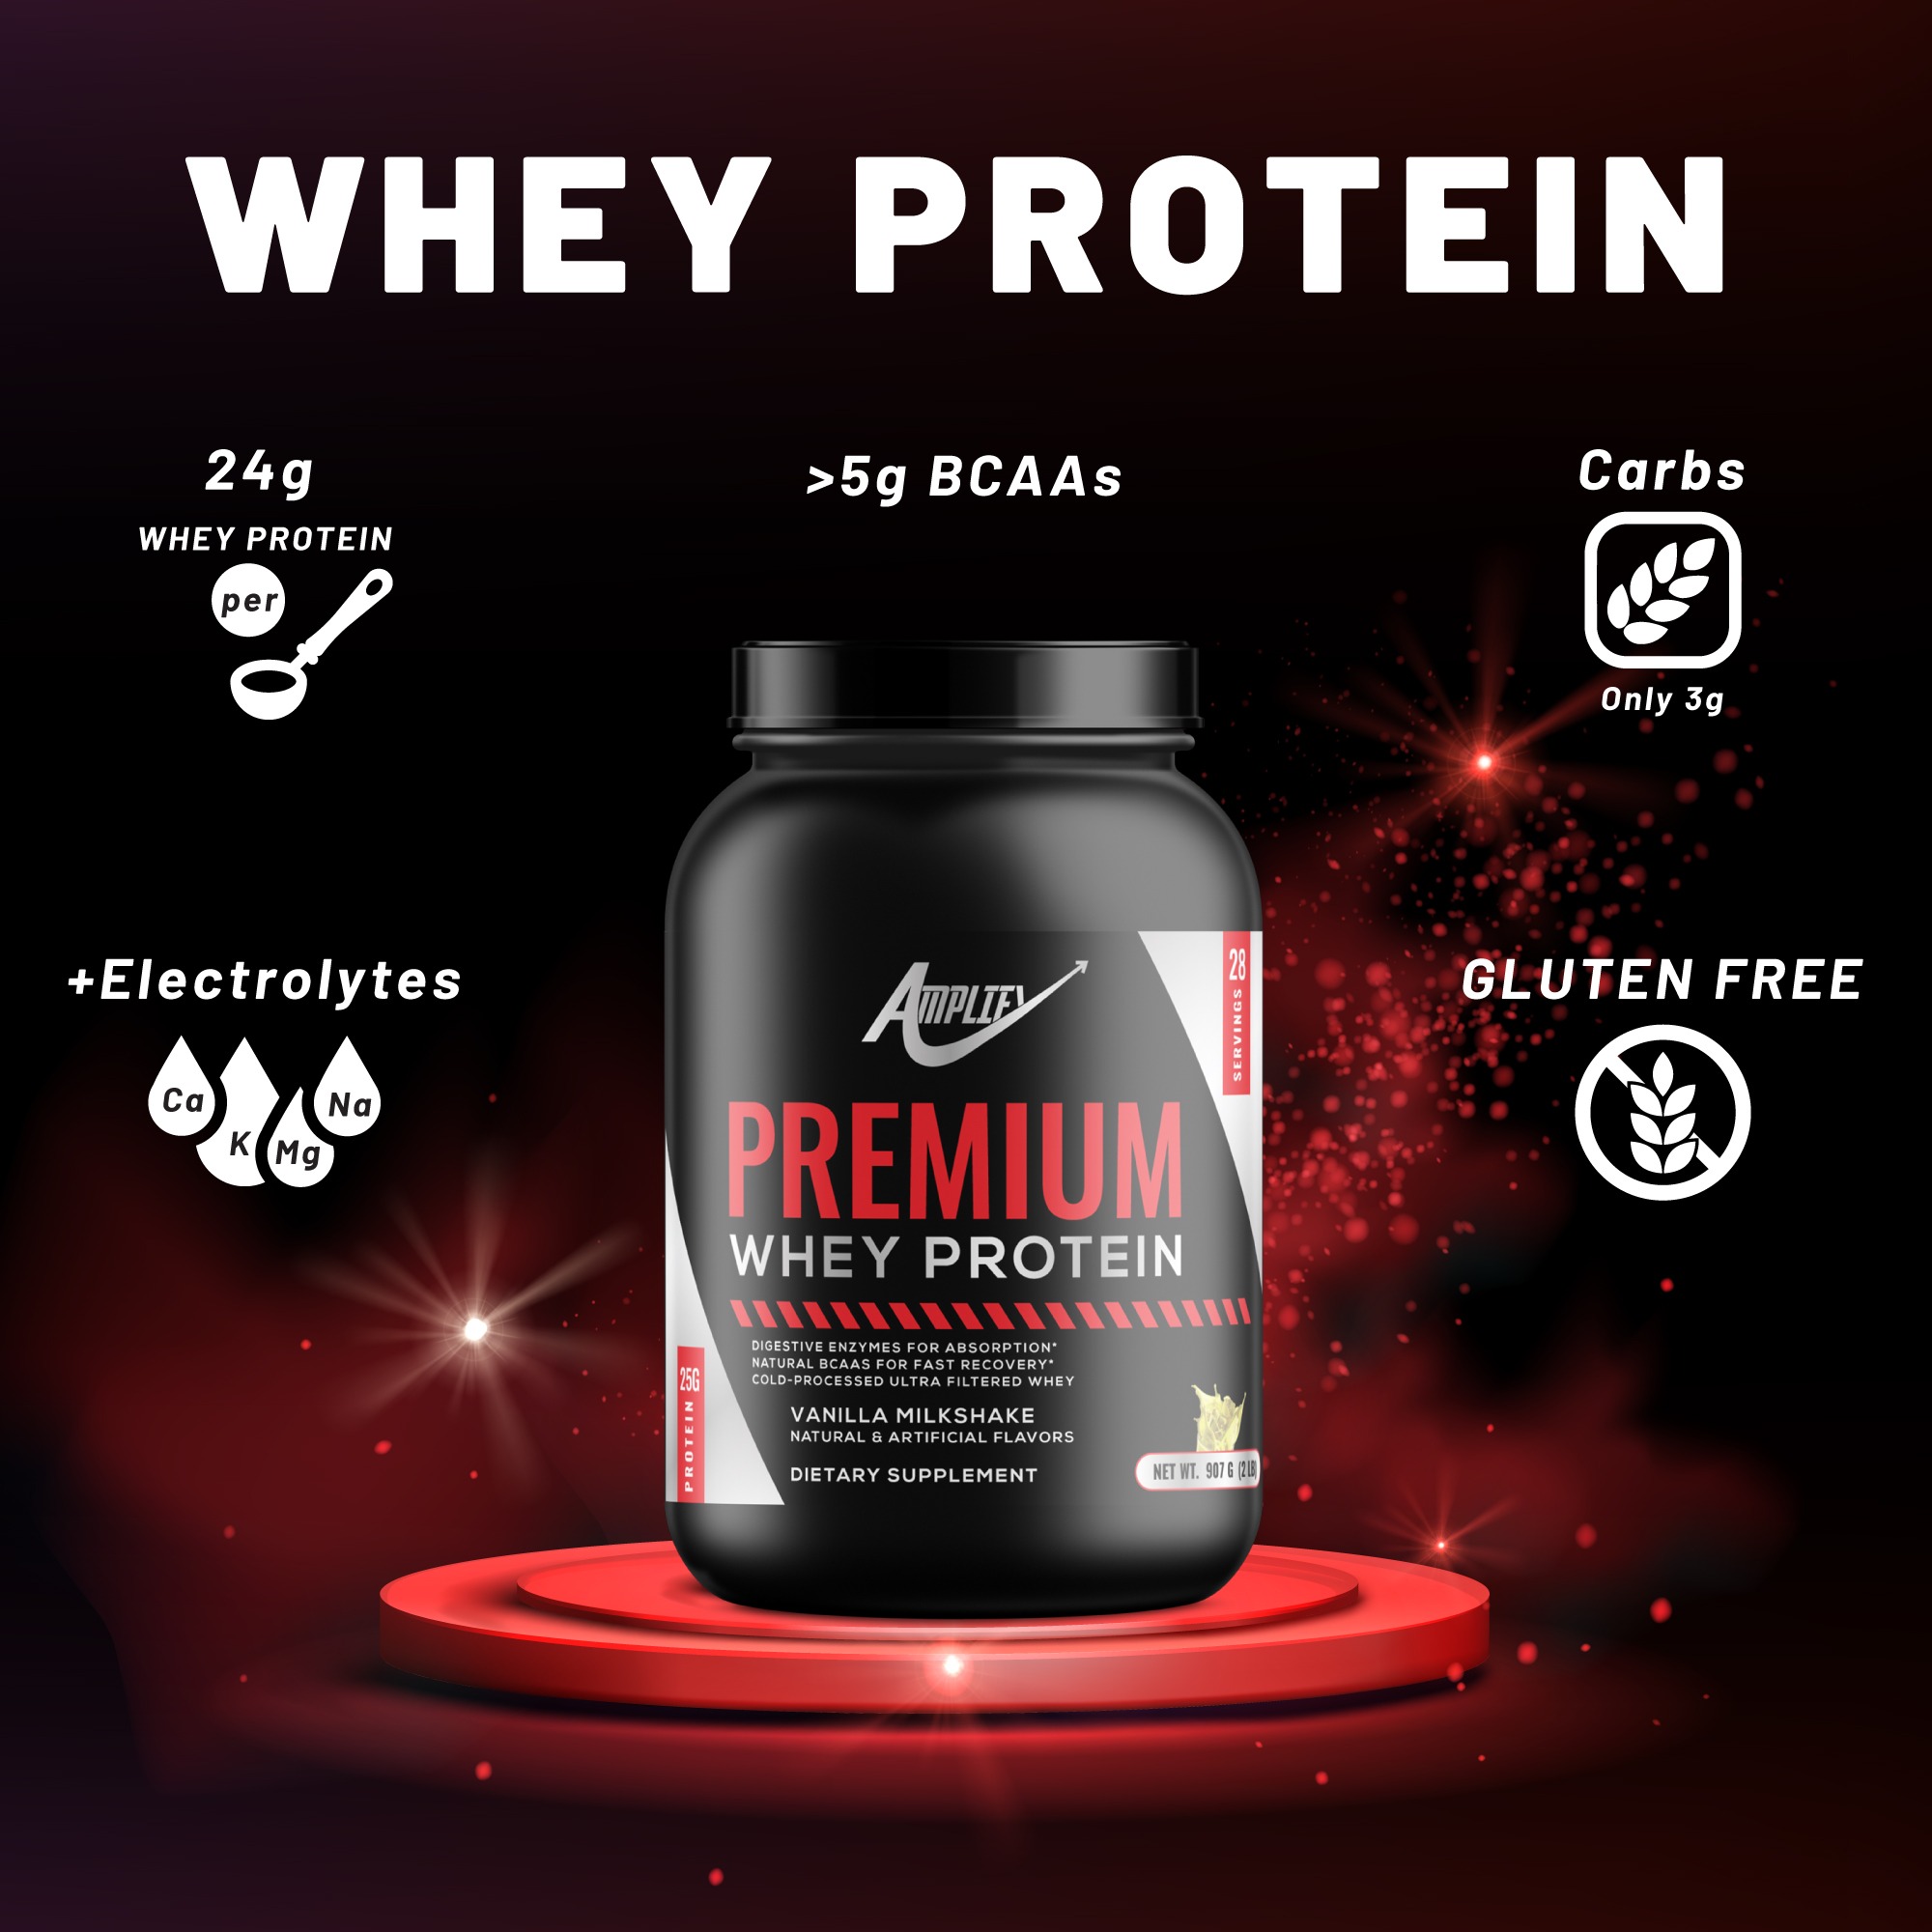 24g WHEY PROTEIN per scoop - +electrolytes - Only 3g carbs - <5g BCAAs - Gluten Free - Vanilla, Cinnamon, Chocolate flavors